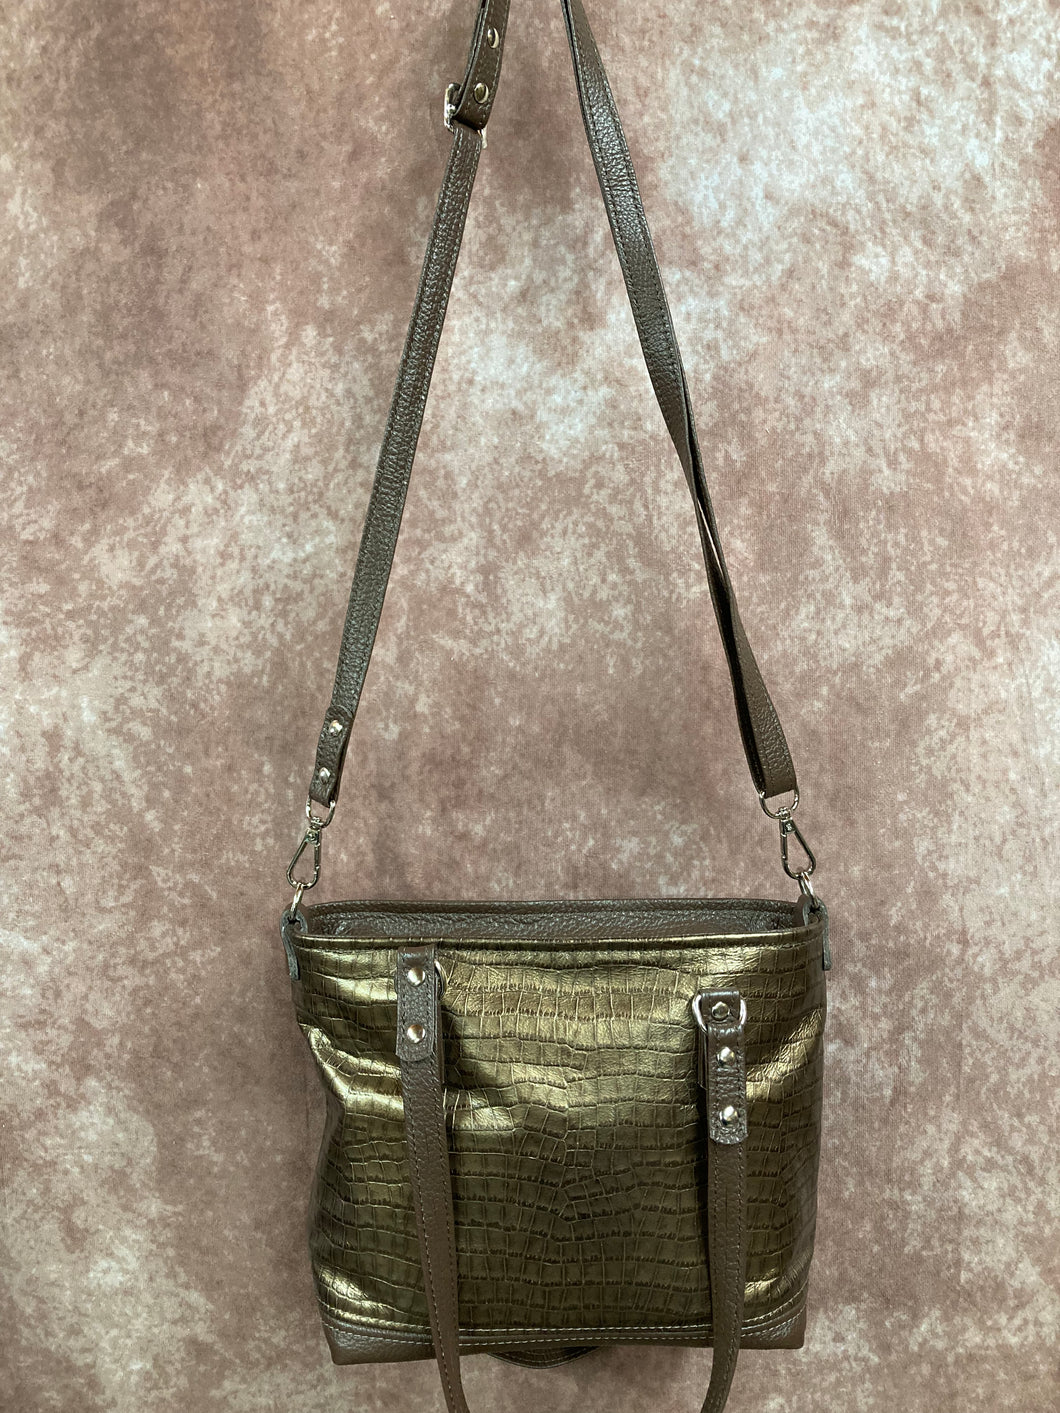 Mini Tote - Brass Reptile Embossed and Brown Leather